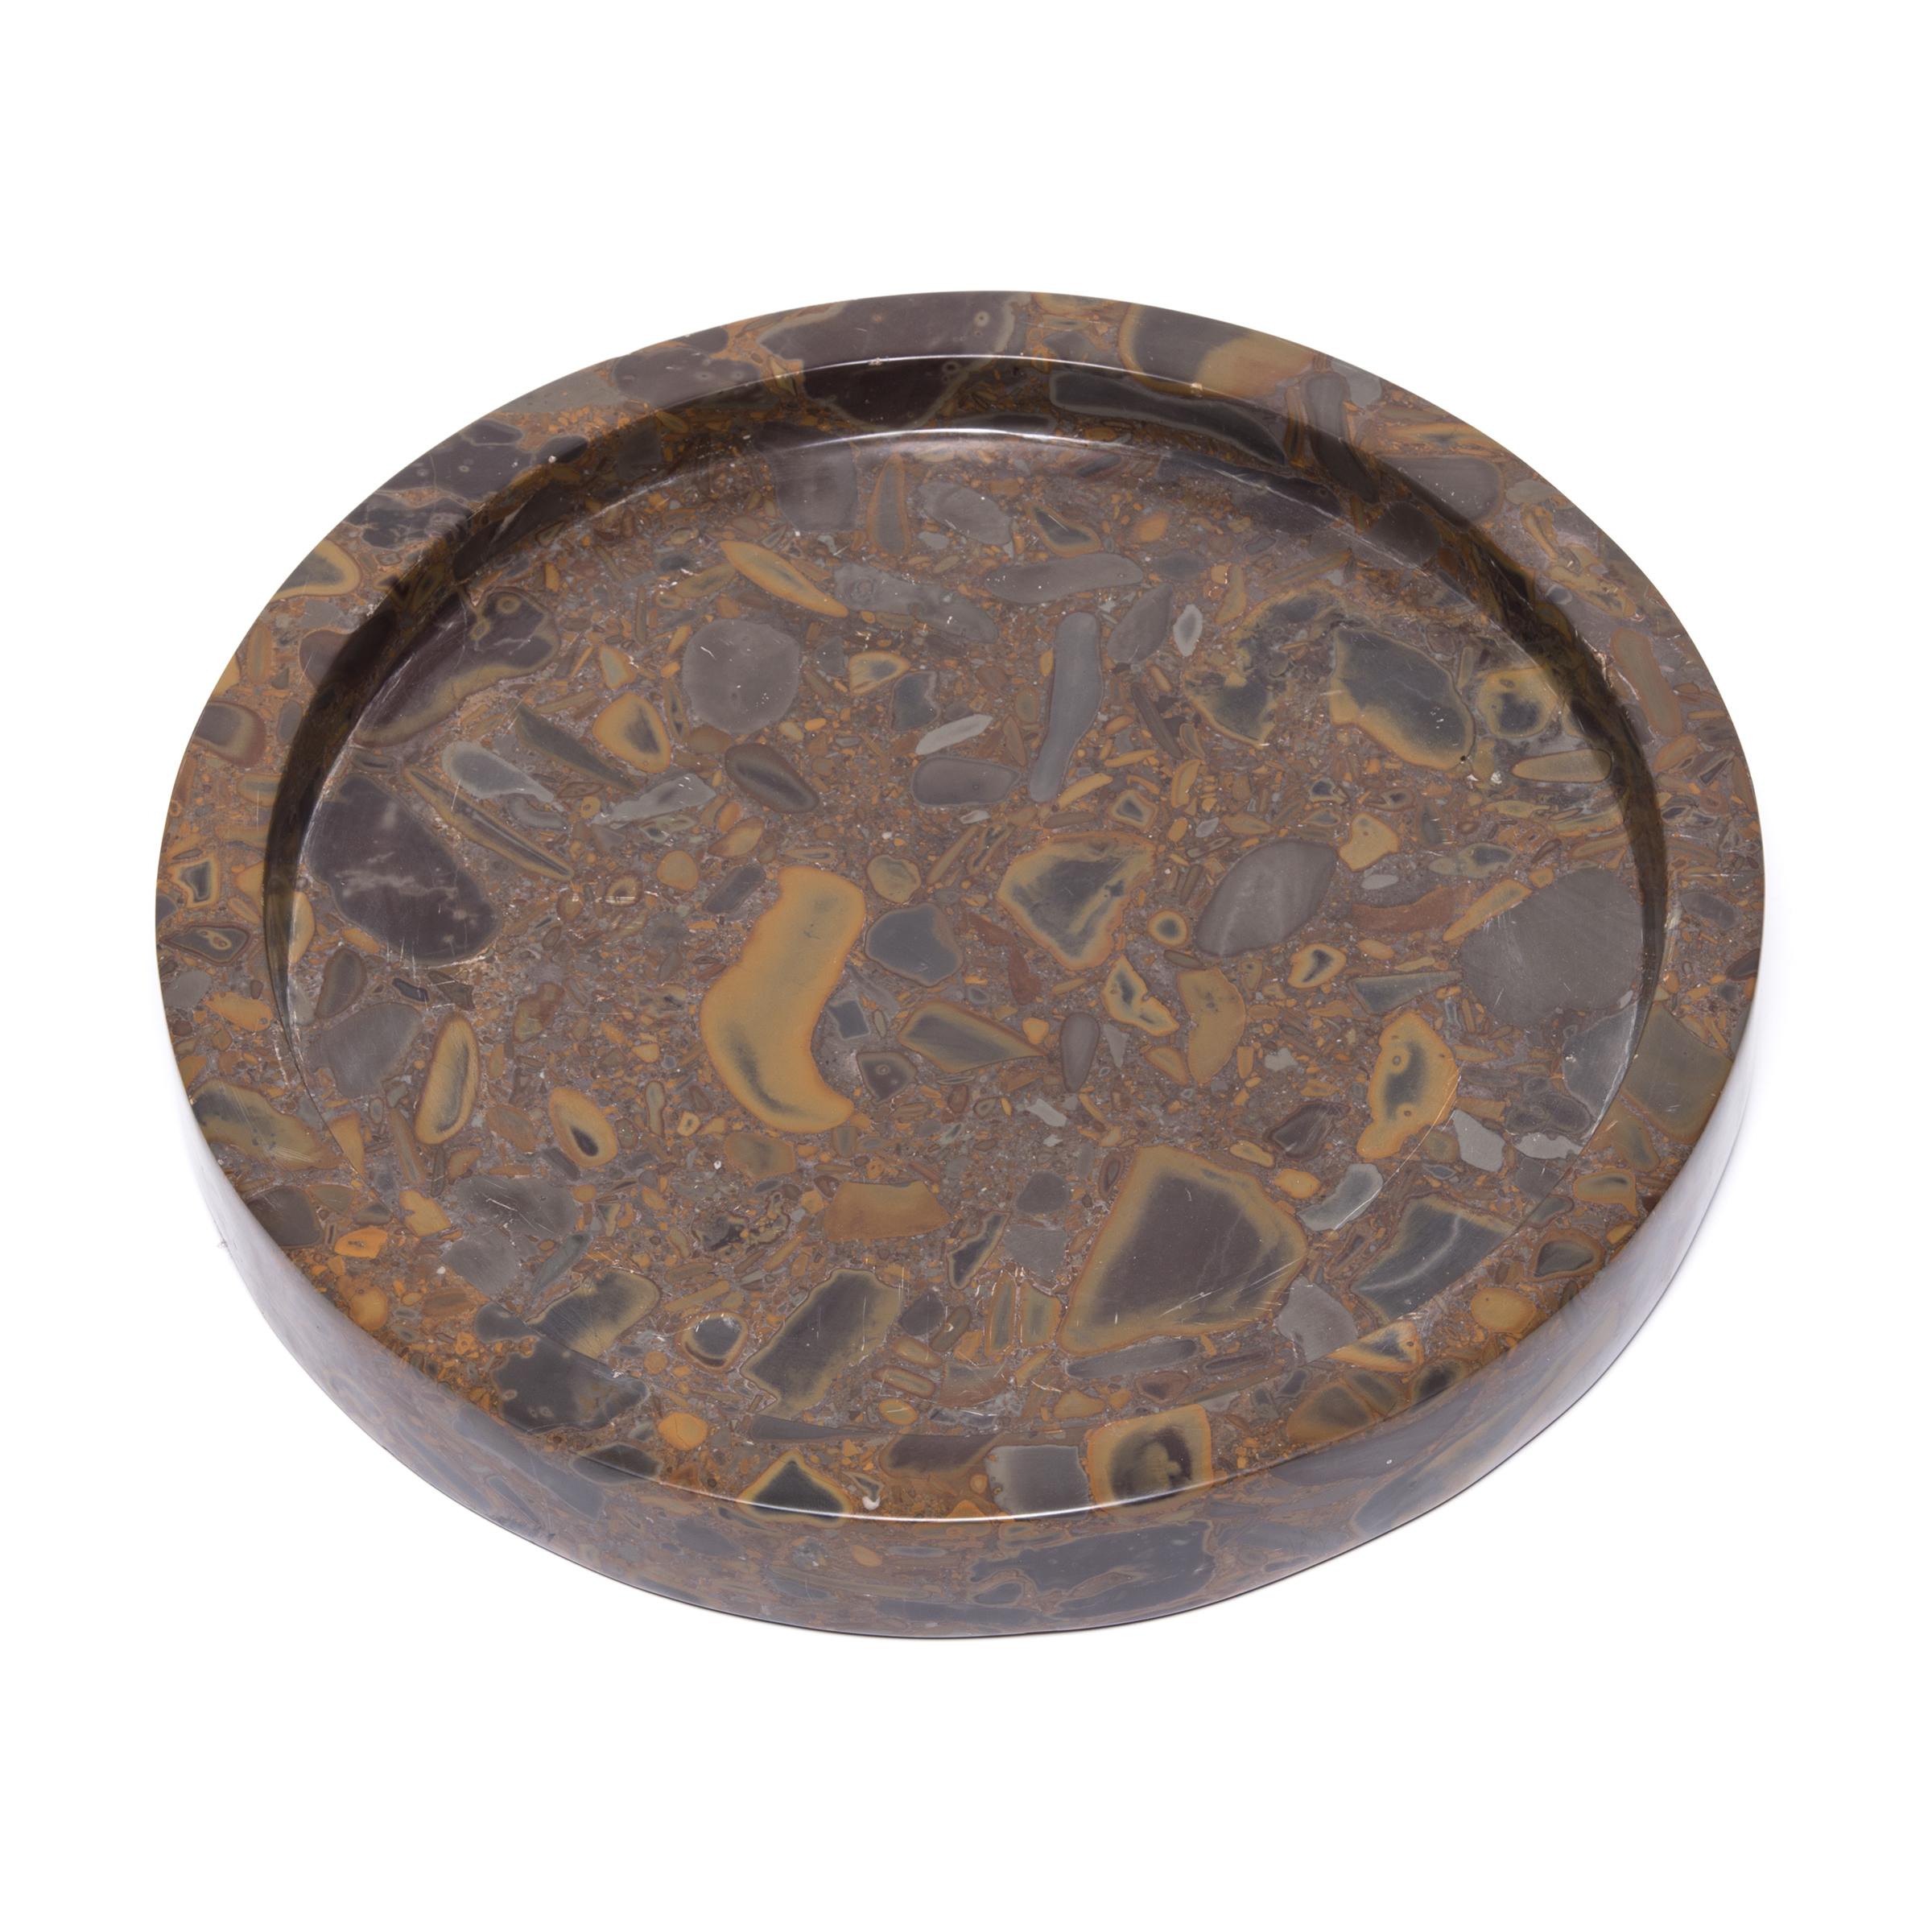 Named for its unique composite nature, puddingstone is a conglomerate stone indigenous to southern China. Prized by scholars for generations, the abstract patterns were an invitation for contemplation. This contemporary tray is hand carved into a